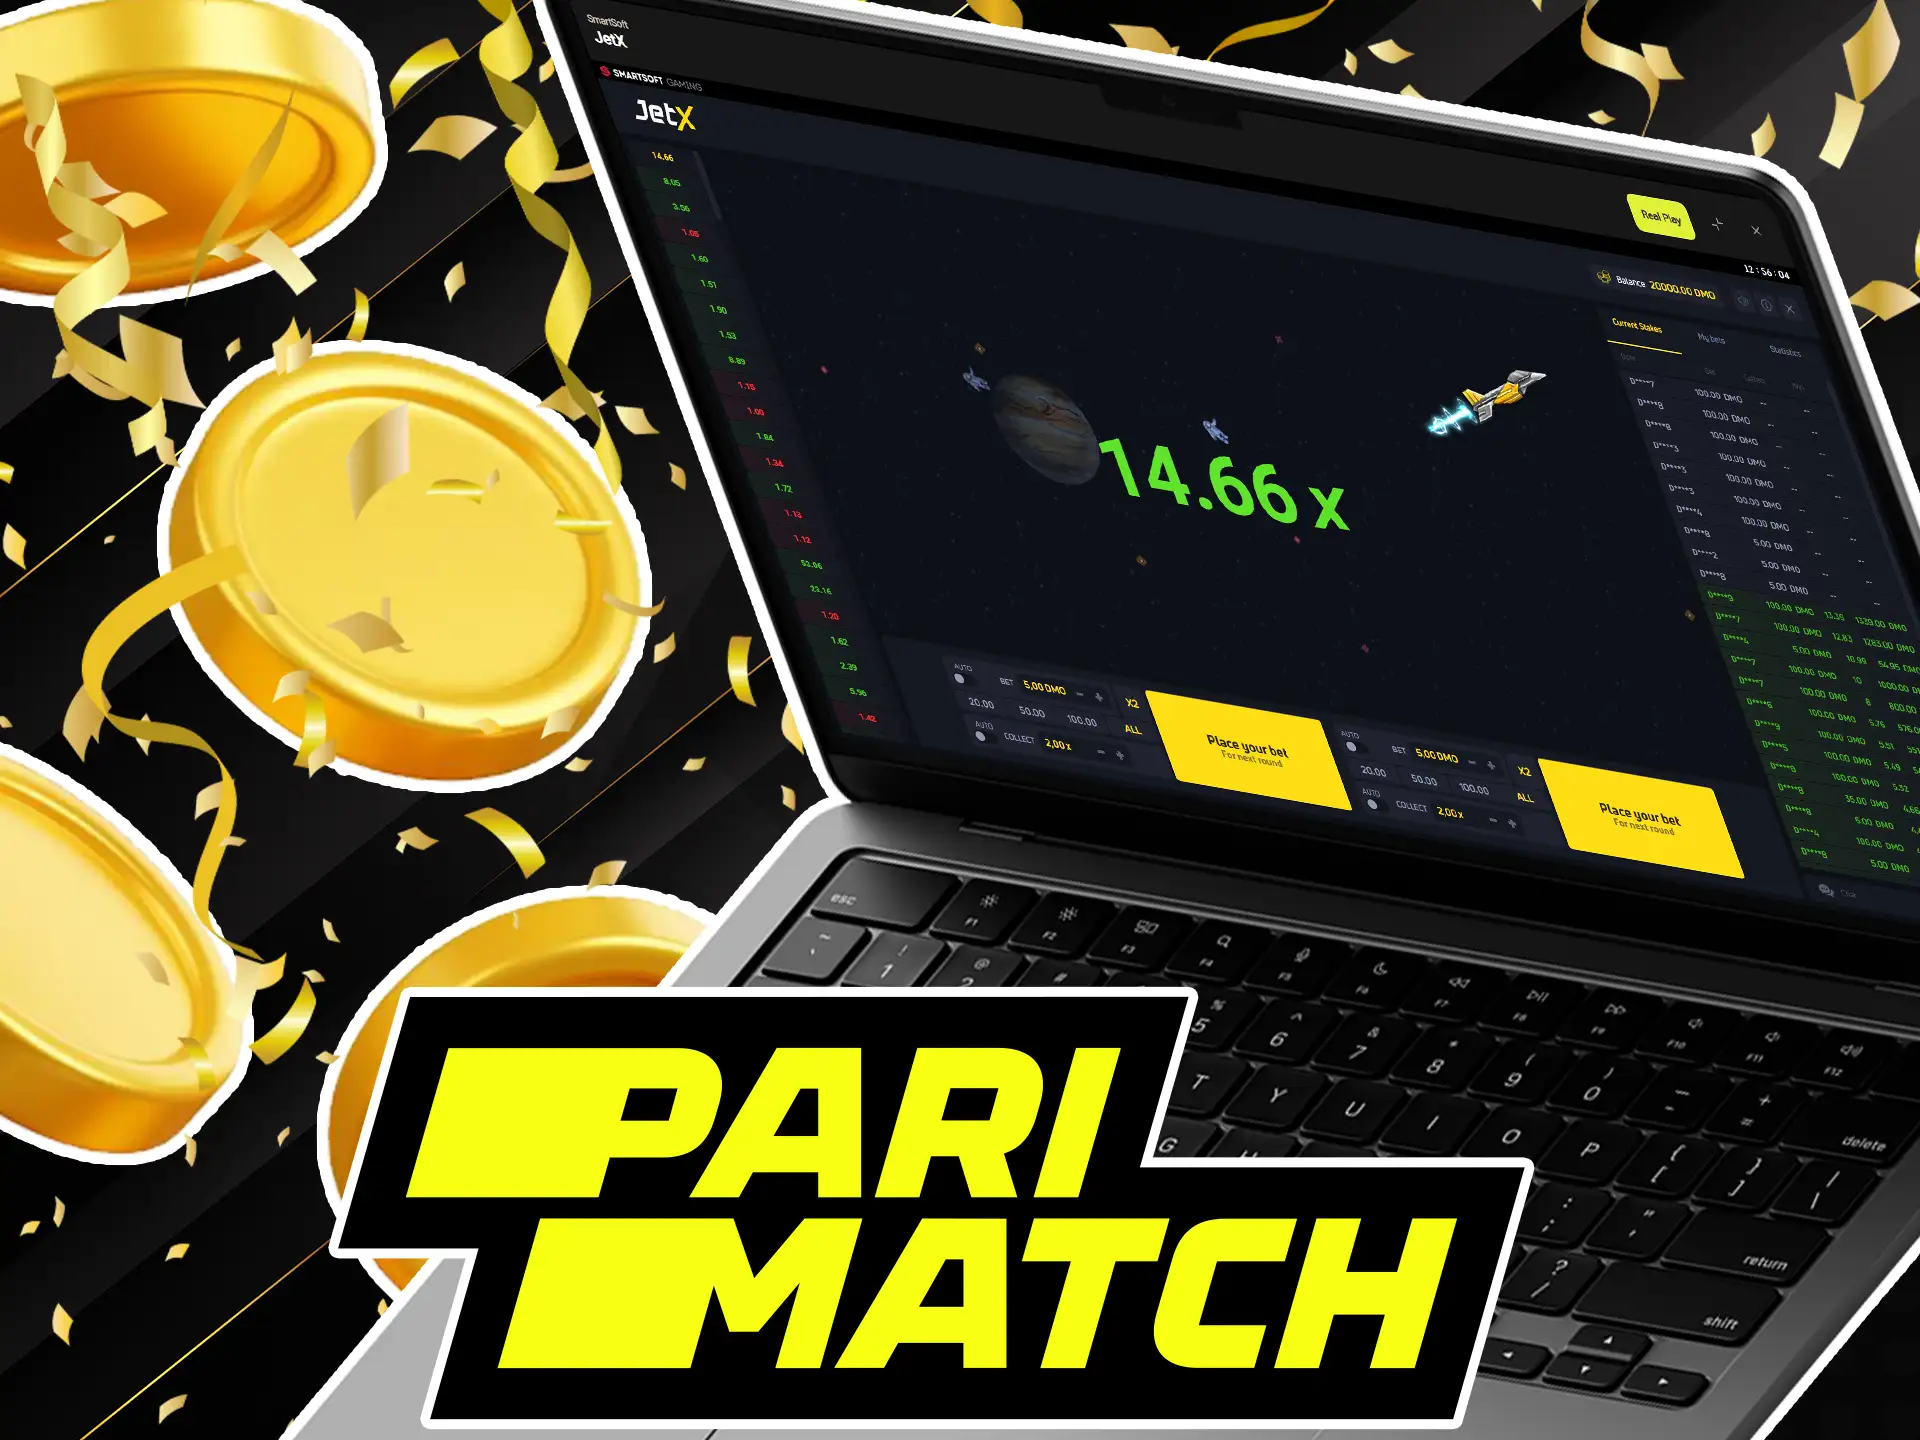 Try some strategies to improve your odds in Jet-X on Parimatch.